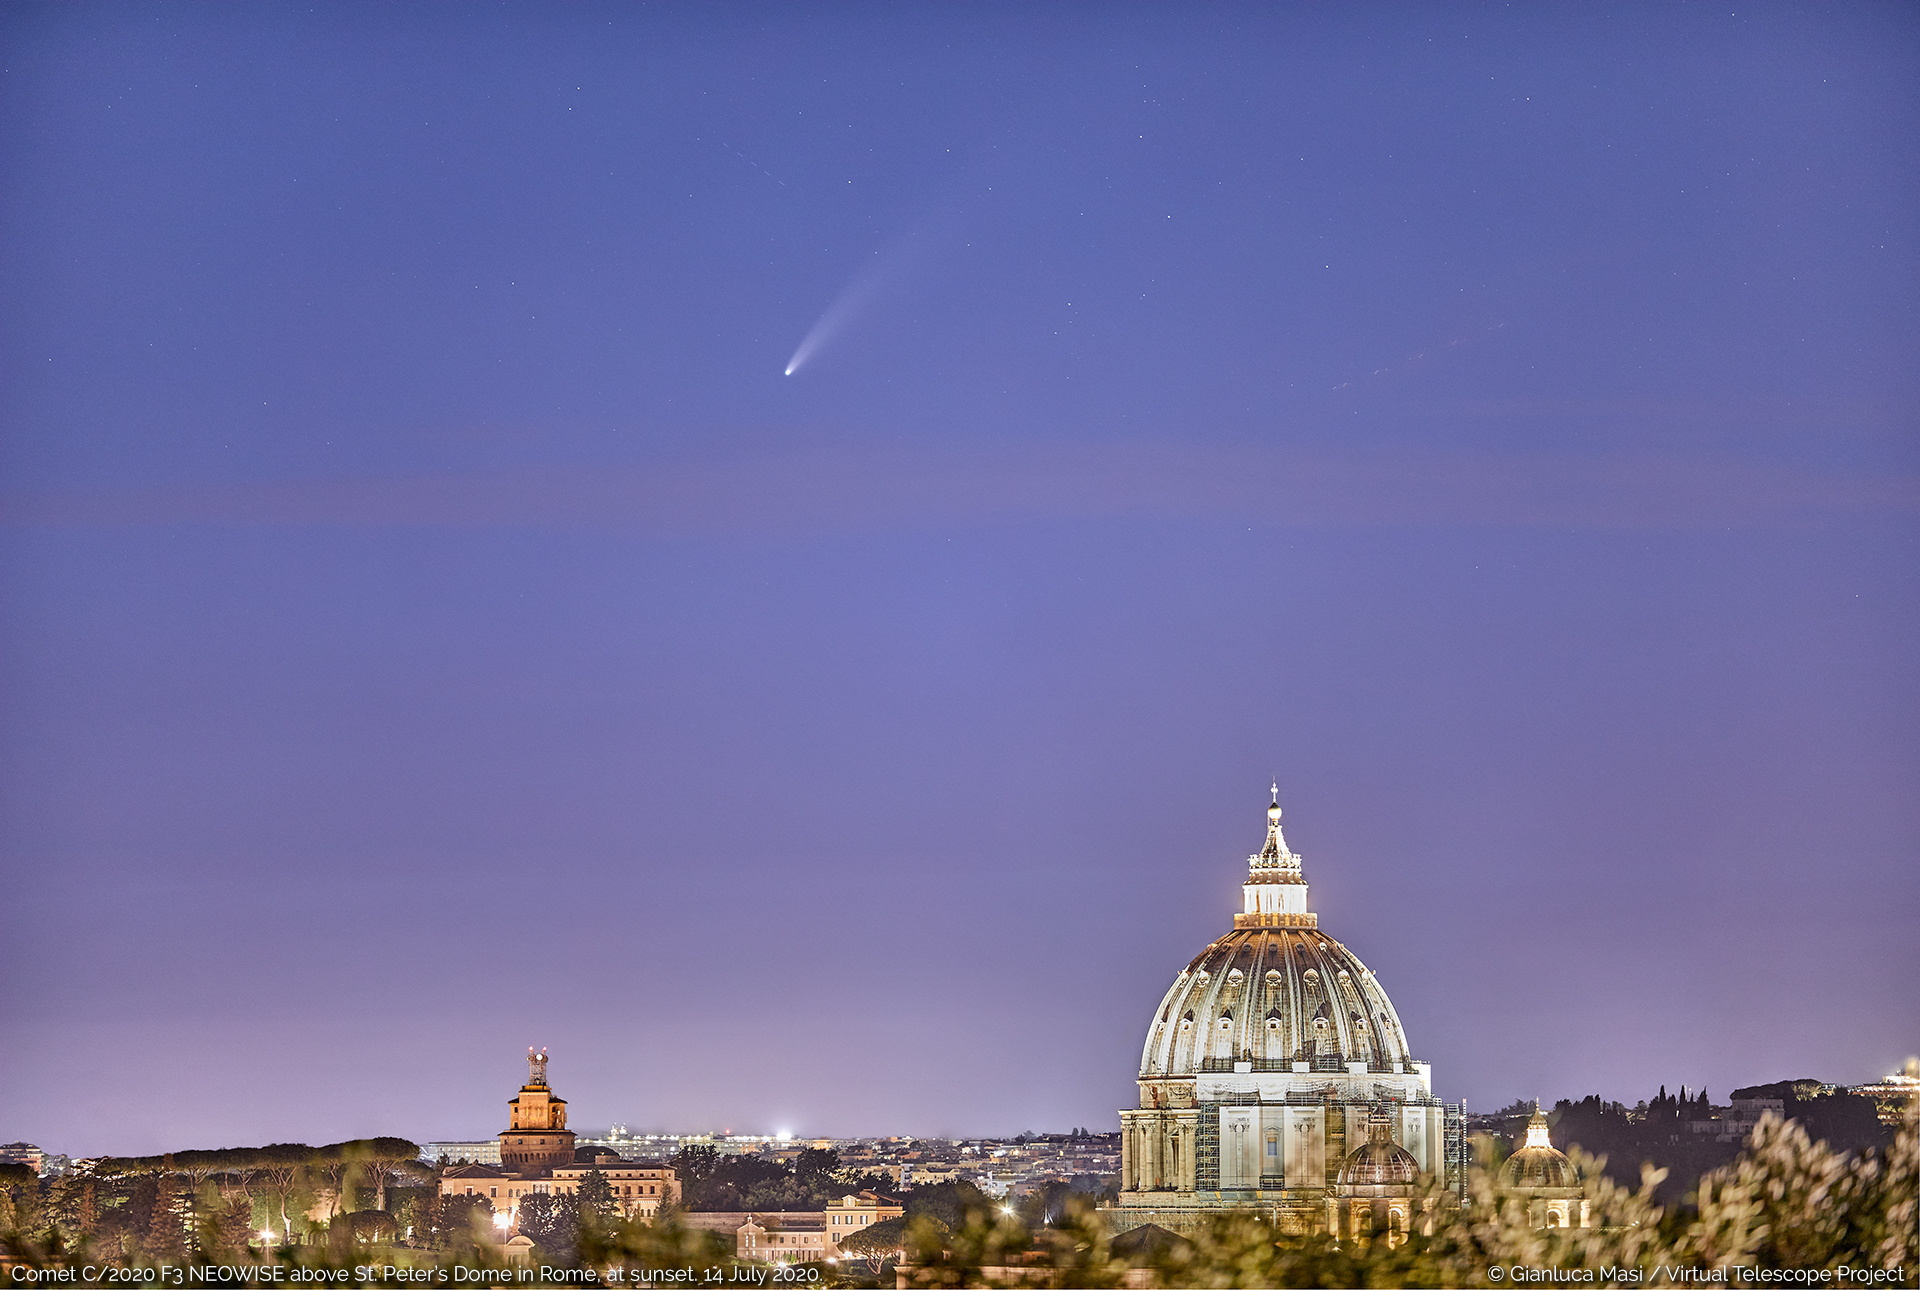 Comet C/2020 F3 NEOWISE is perfectly placed above St. Peters Dome - 14 July 2020.